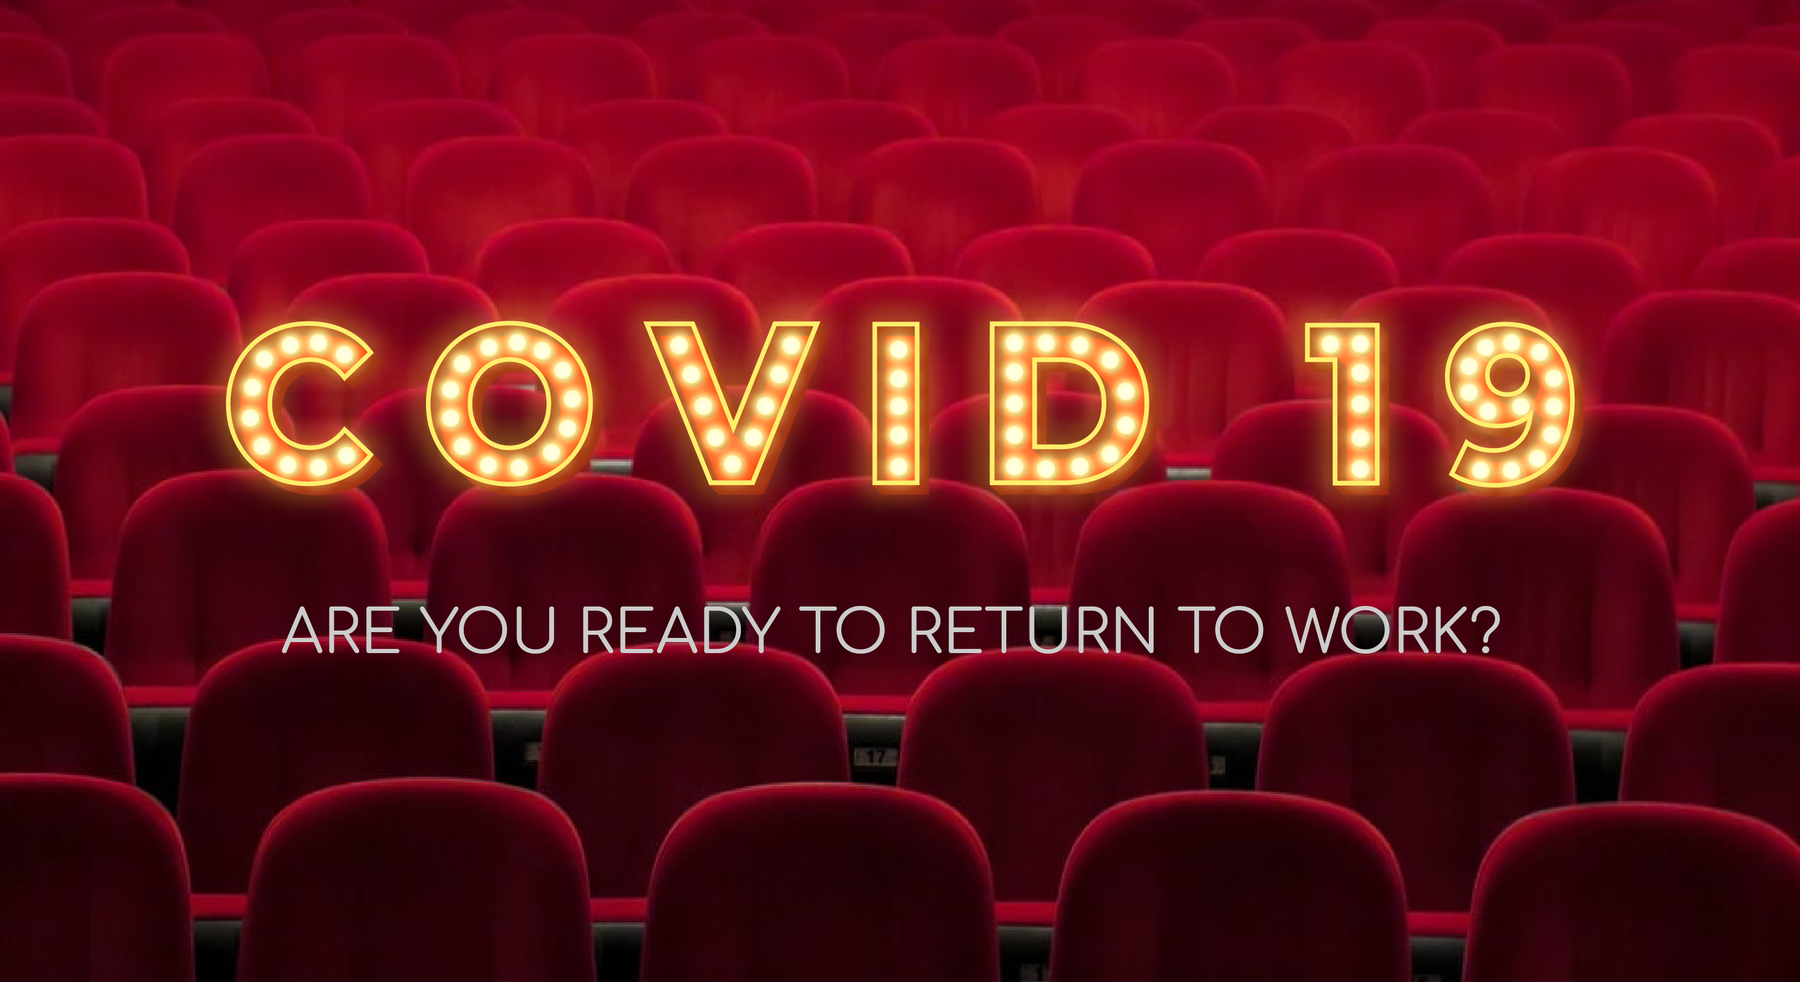 Covid 19 - Are you ready to return to work?